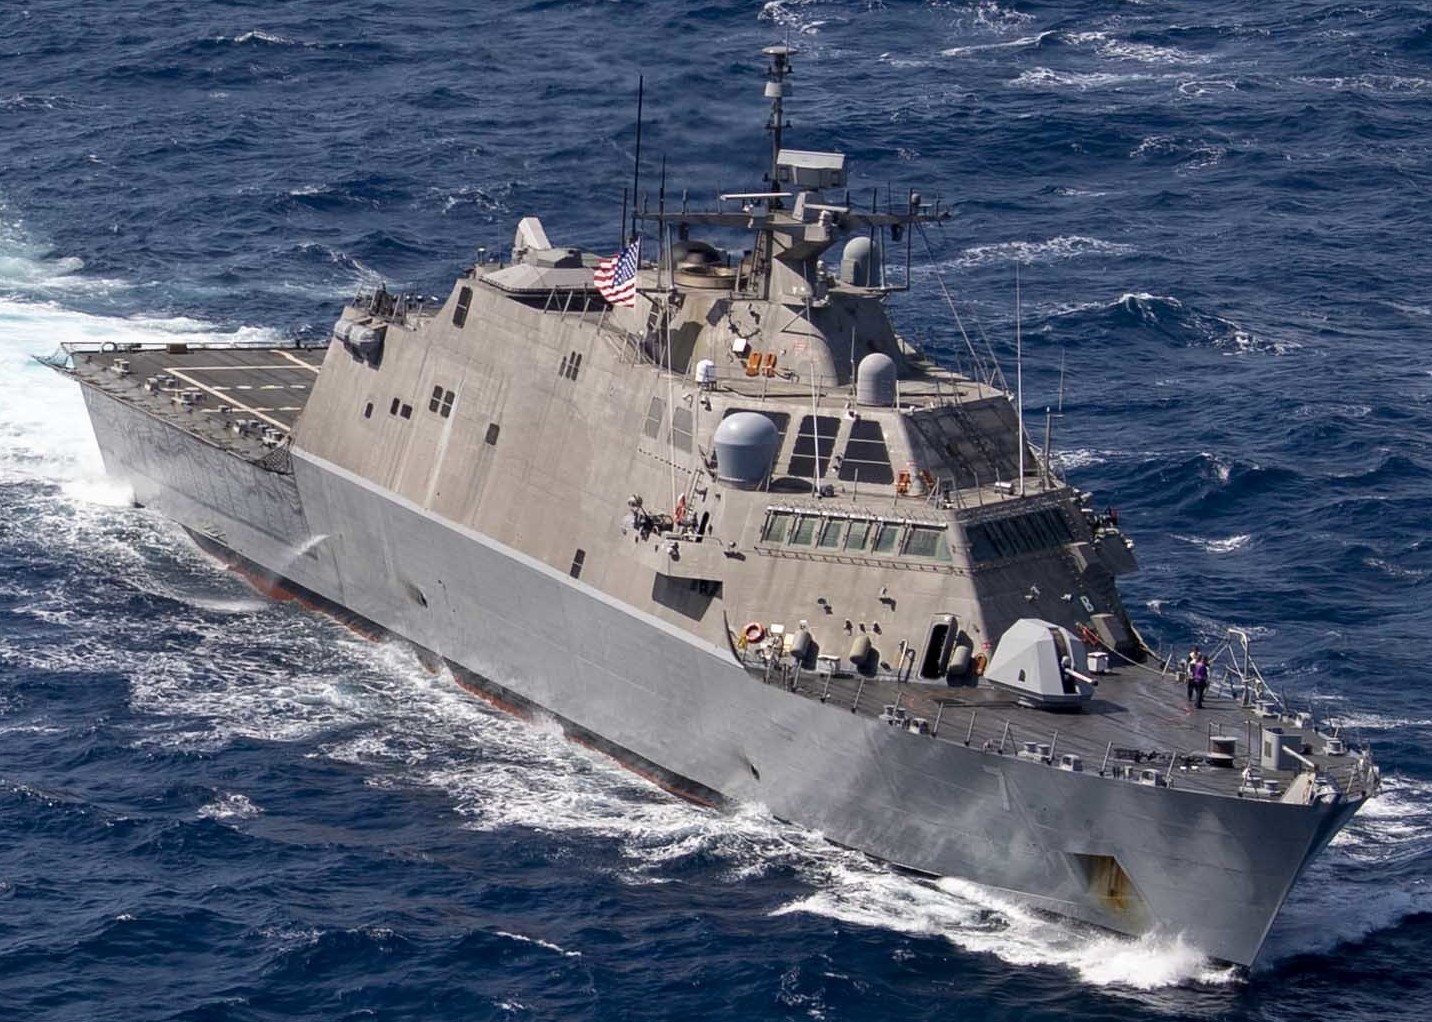 lcs-7 uss detroit freedom class littoral combat ship us navy 39